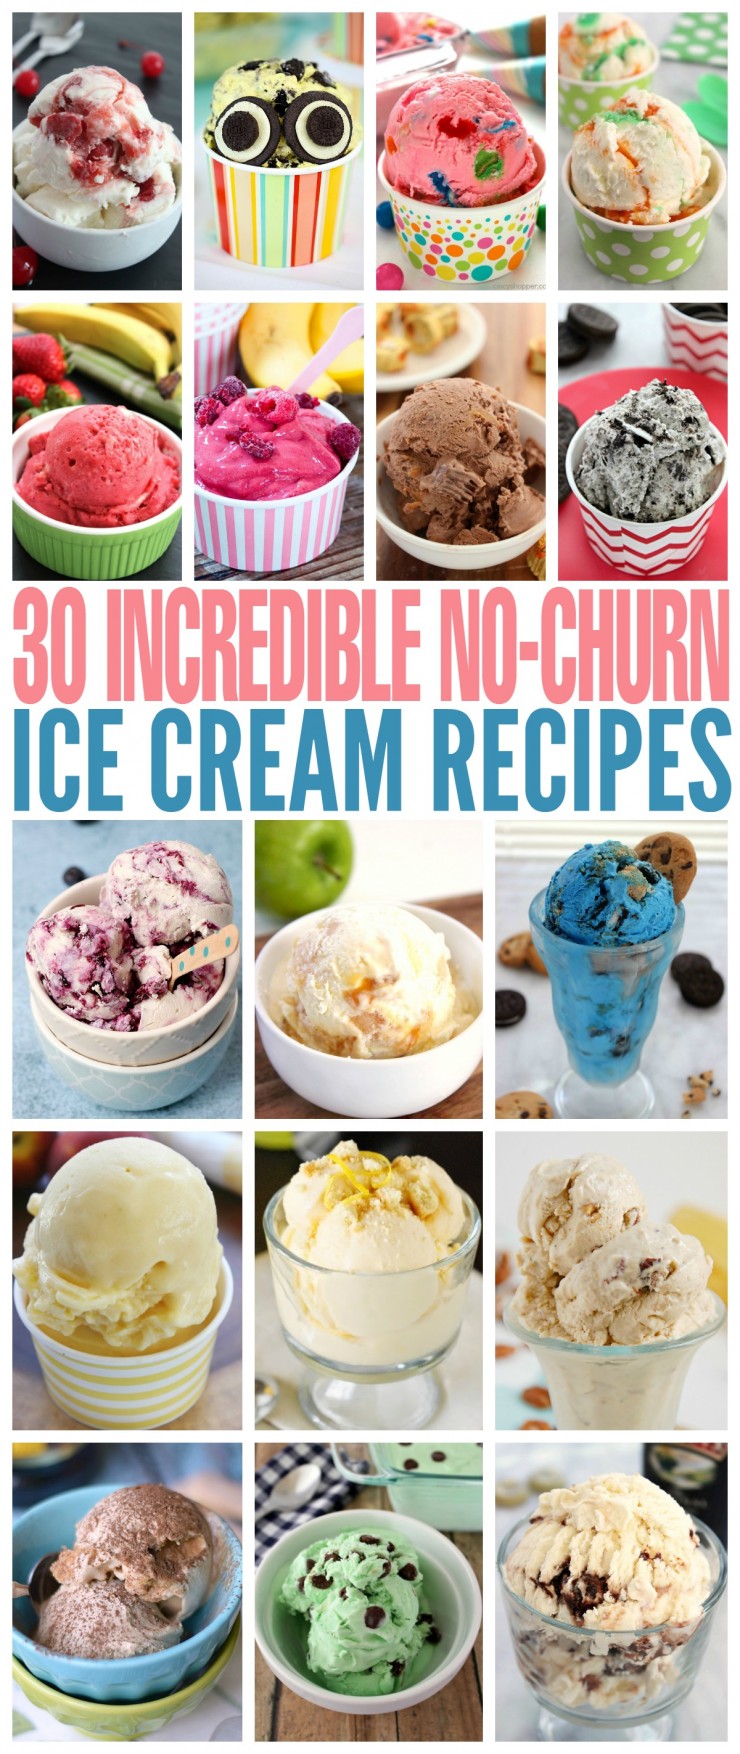 These 30+ Incredible No-Churn Ice Cream Recipes are all super easy to make at home. Ice Cream has never been so good! They are sure to be crowd pleasers all summer long.